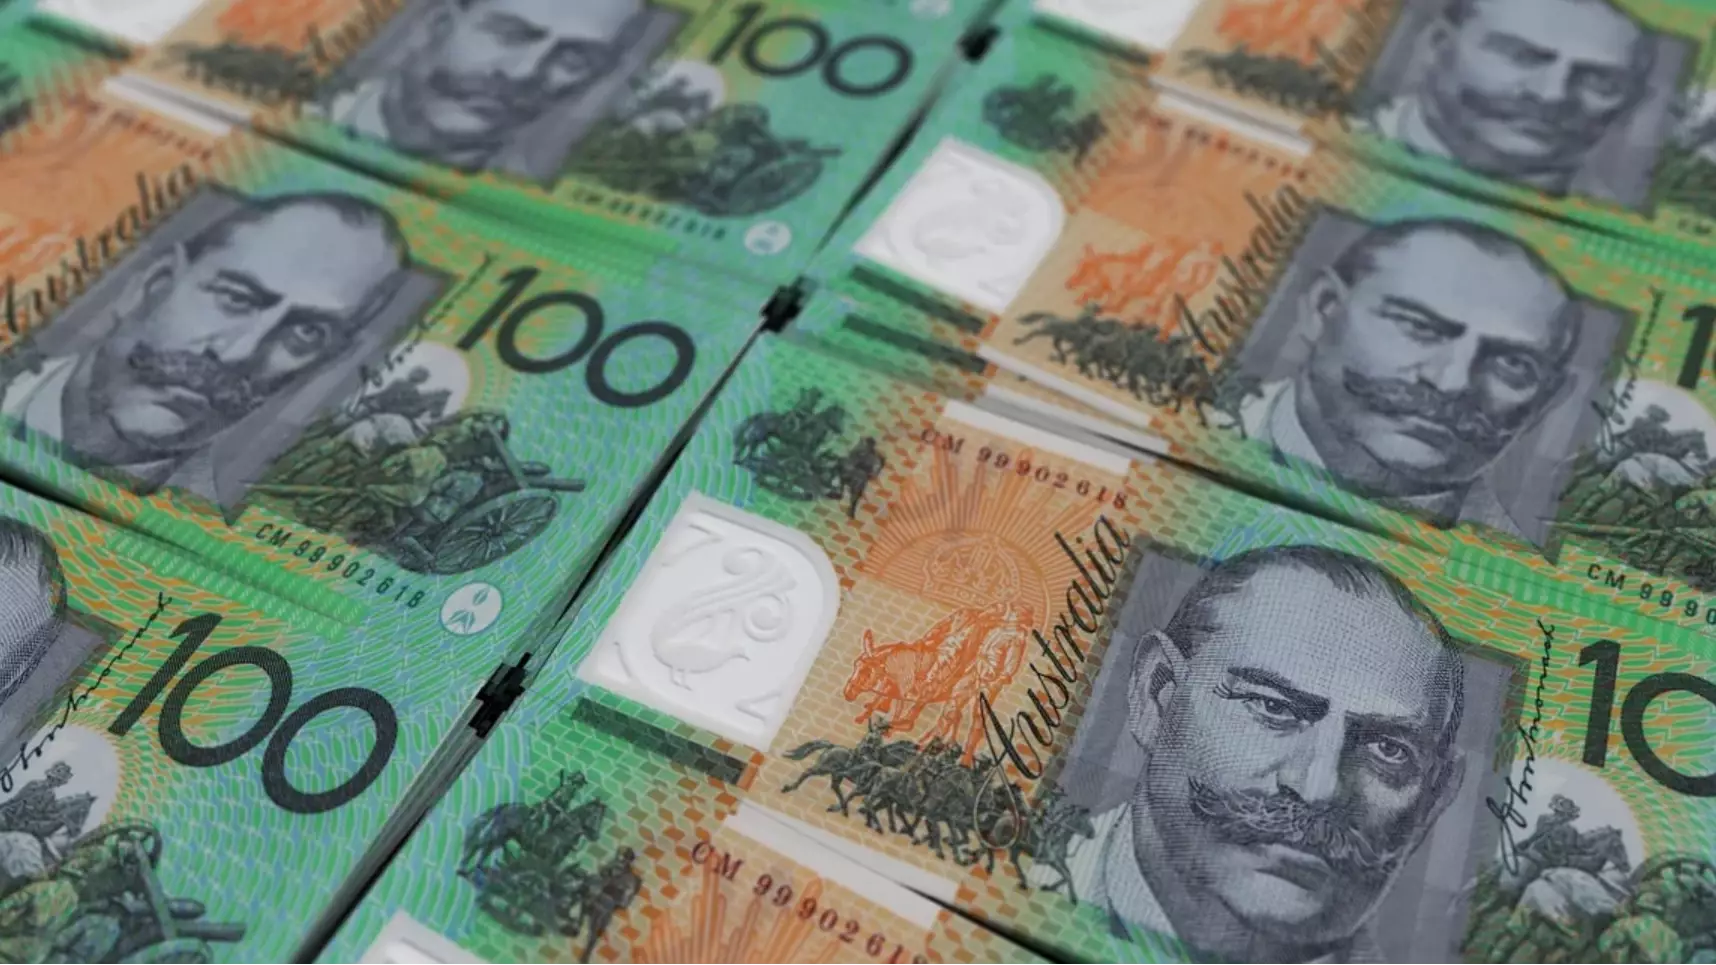 Australian Small Businesses Can Now Defer Loan Repayments For Six Months Due To Coronavirus